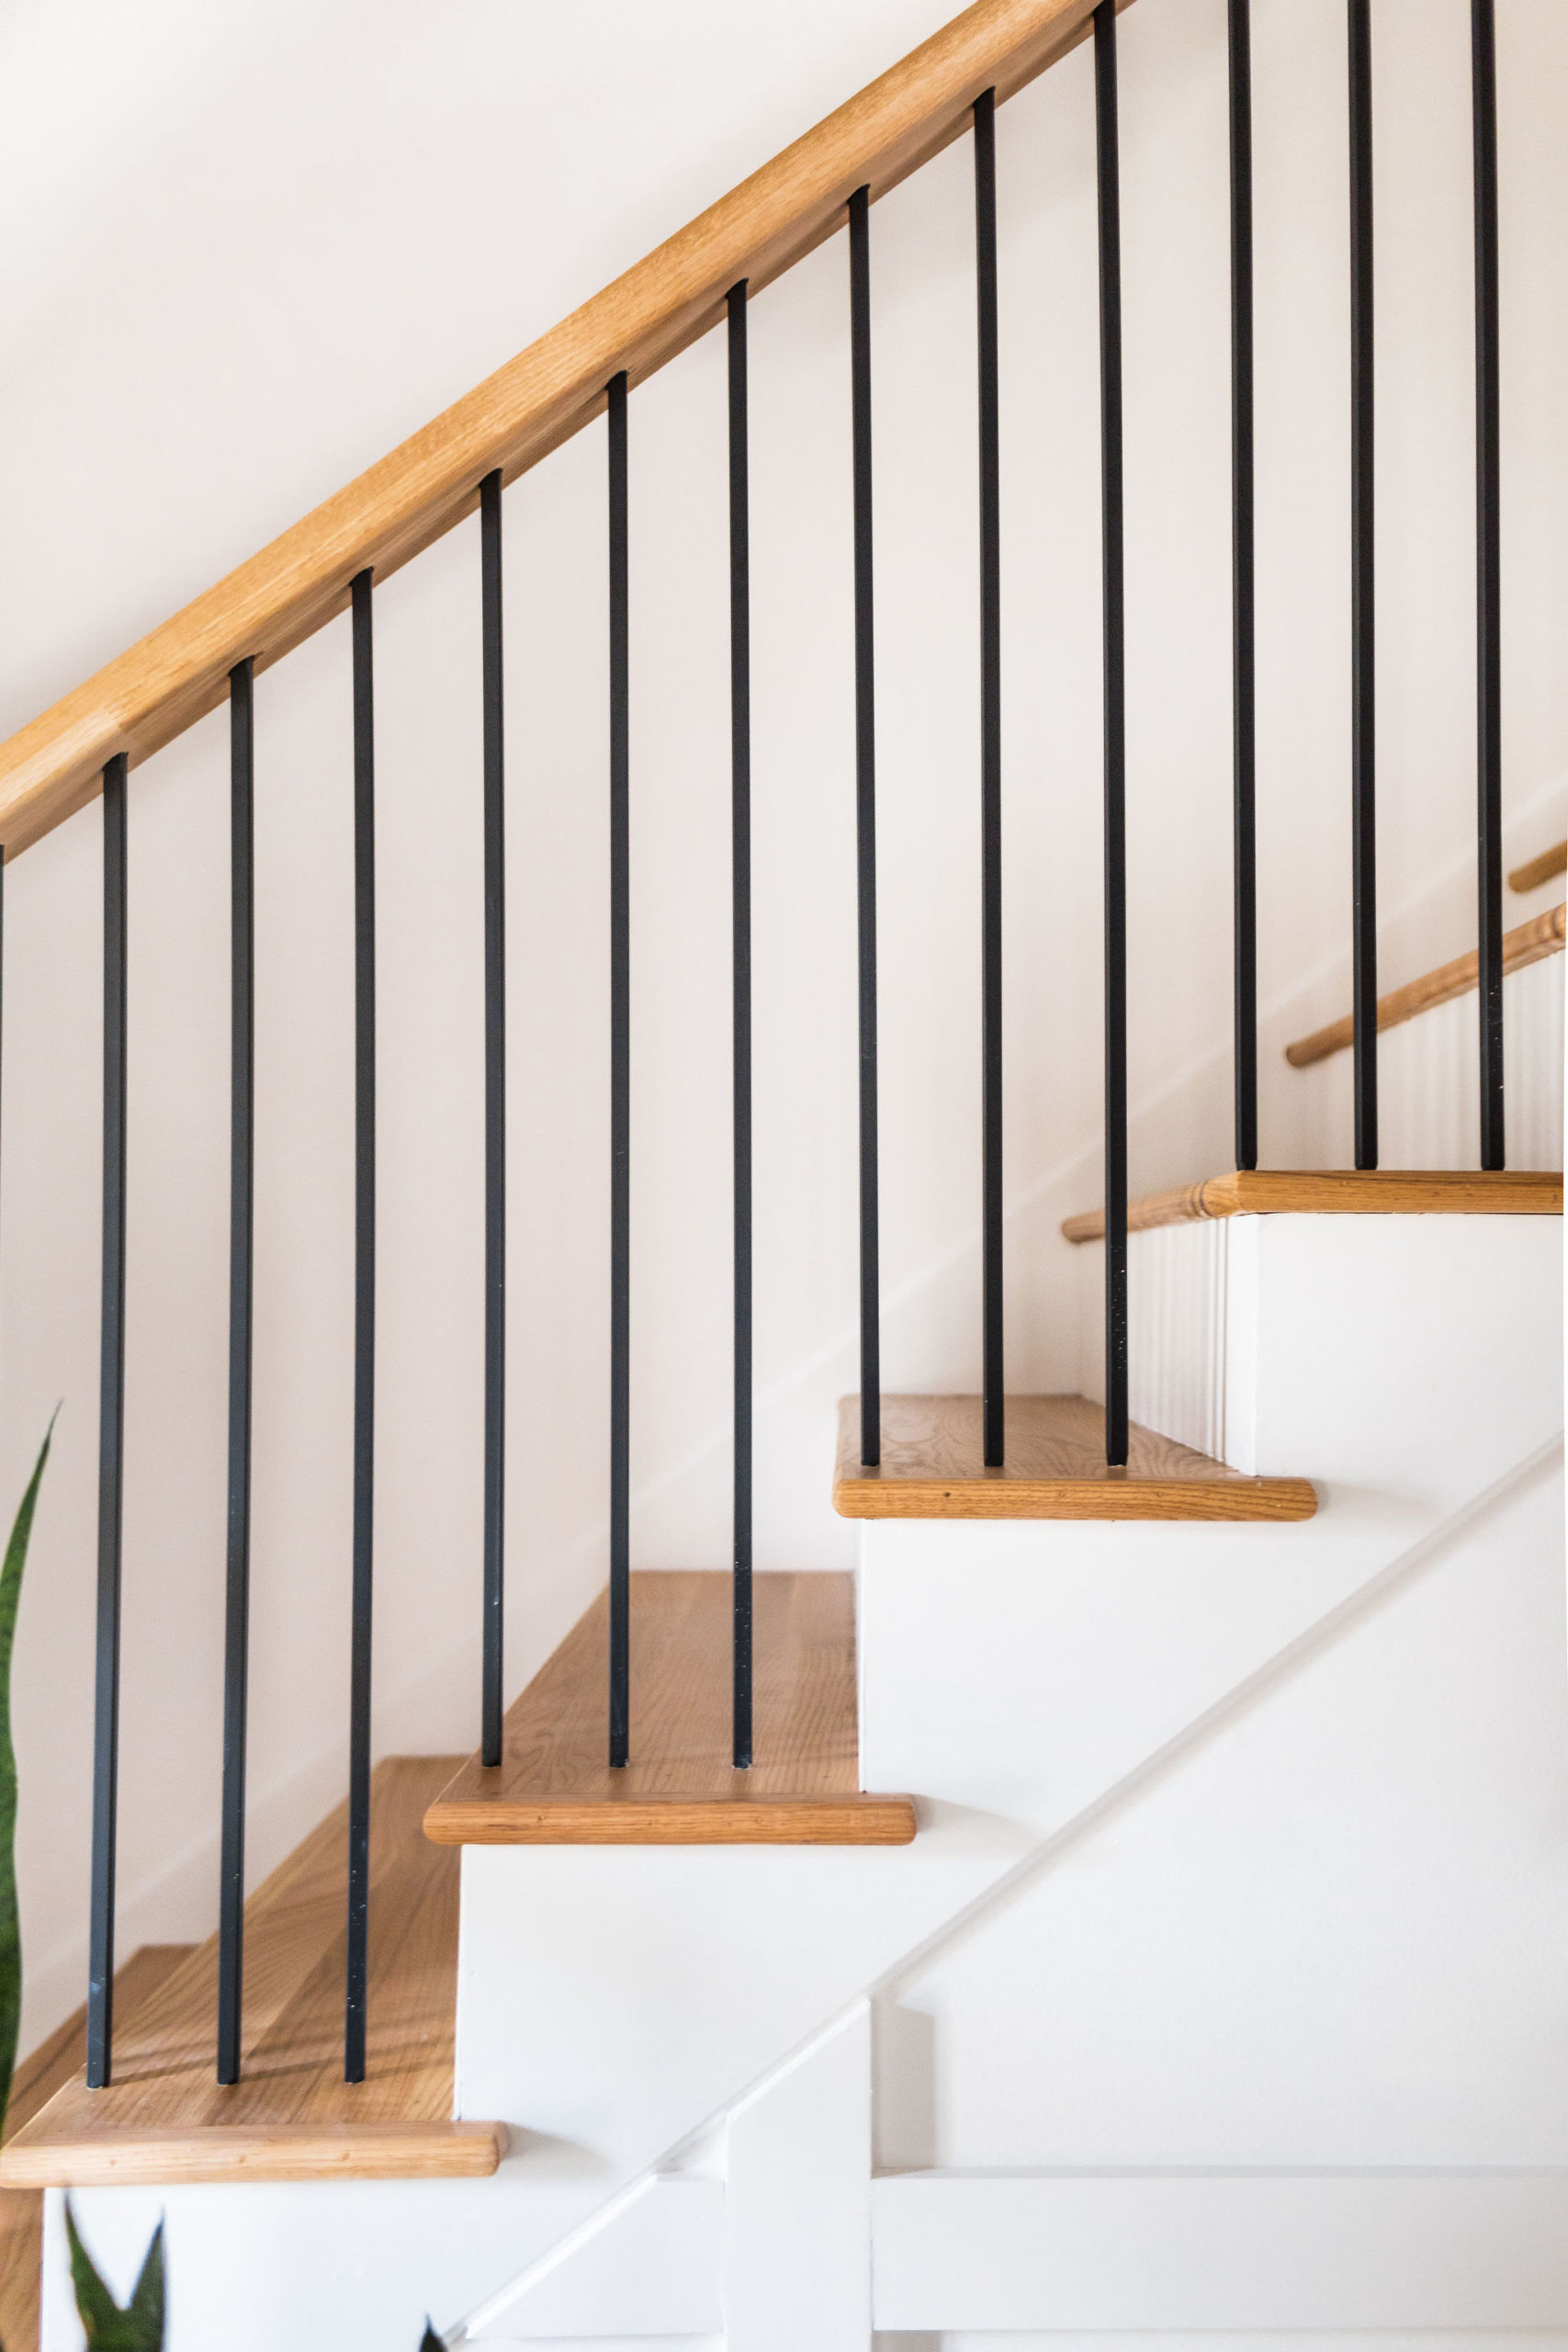 Attractive Staircase Design | Things to Consider 2